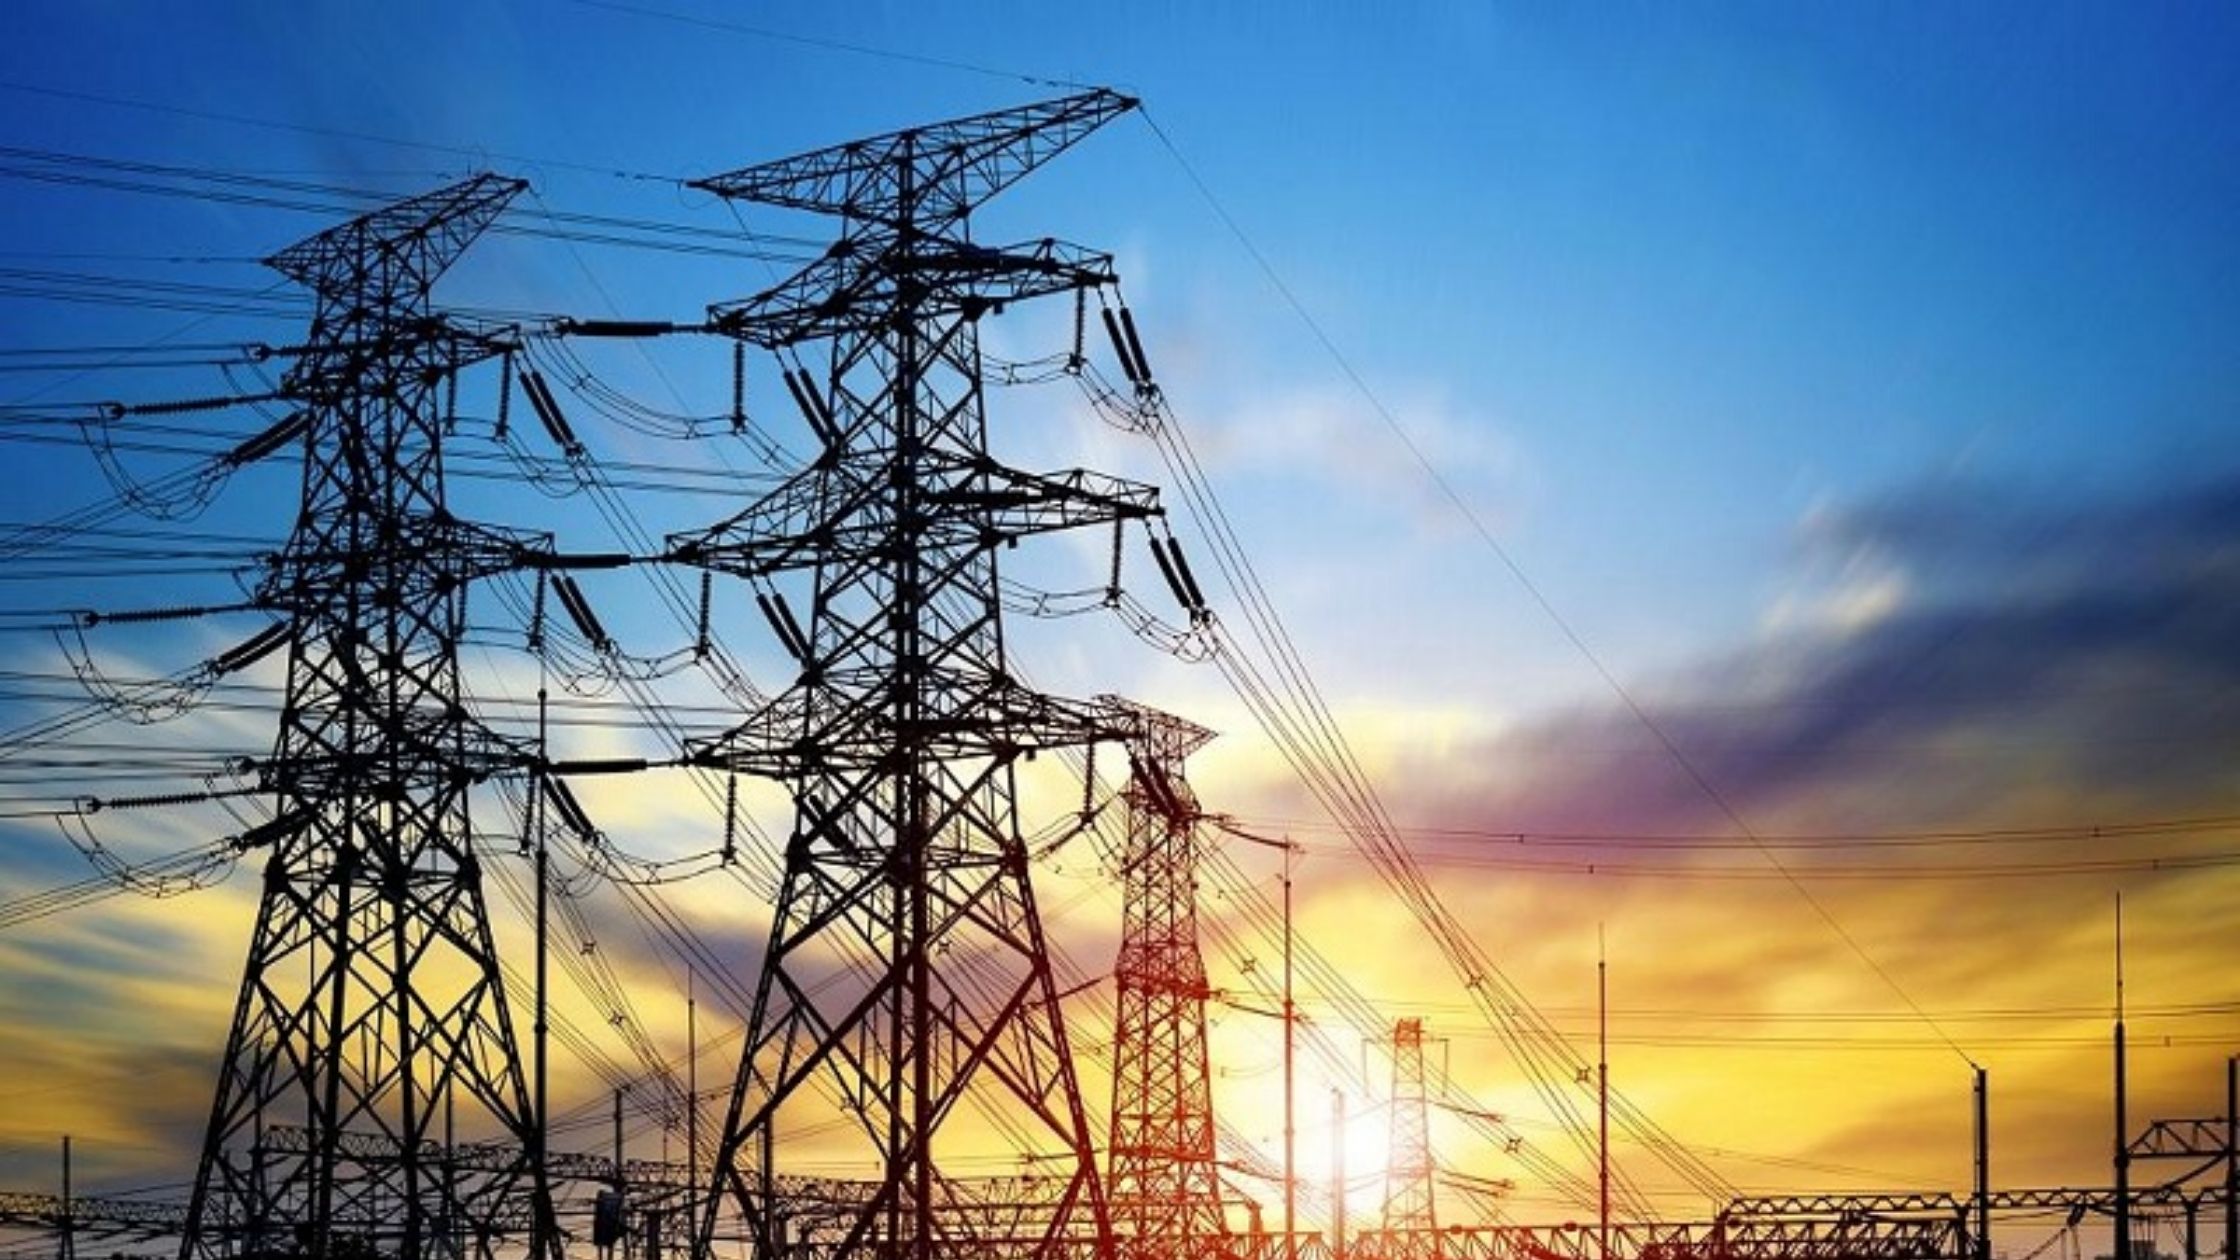 Five new electricity grids will be built in Bihar at a cost of 490 crores